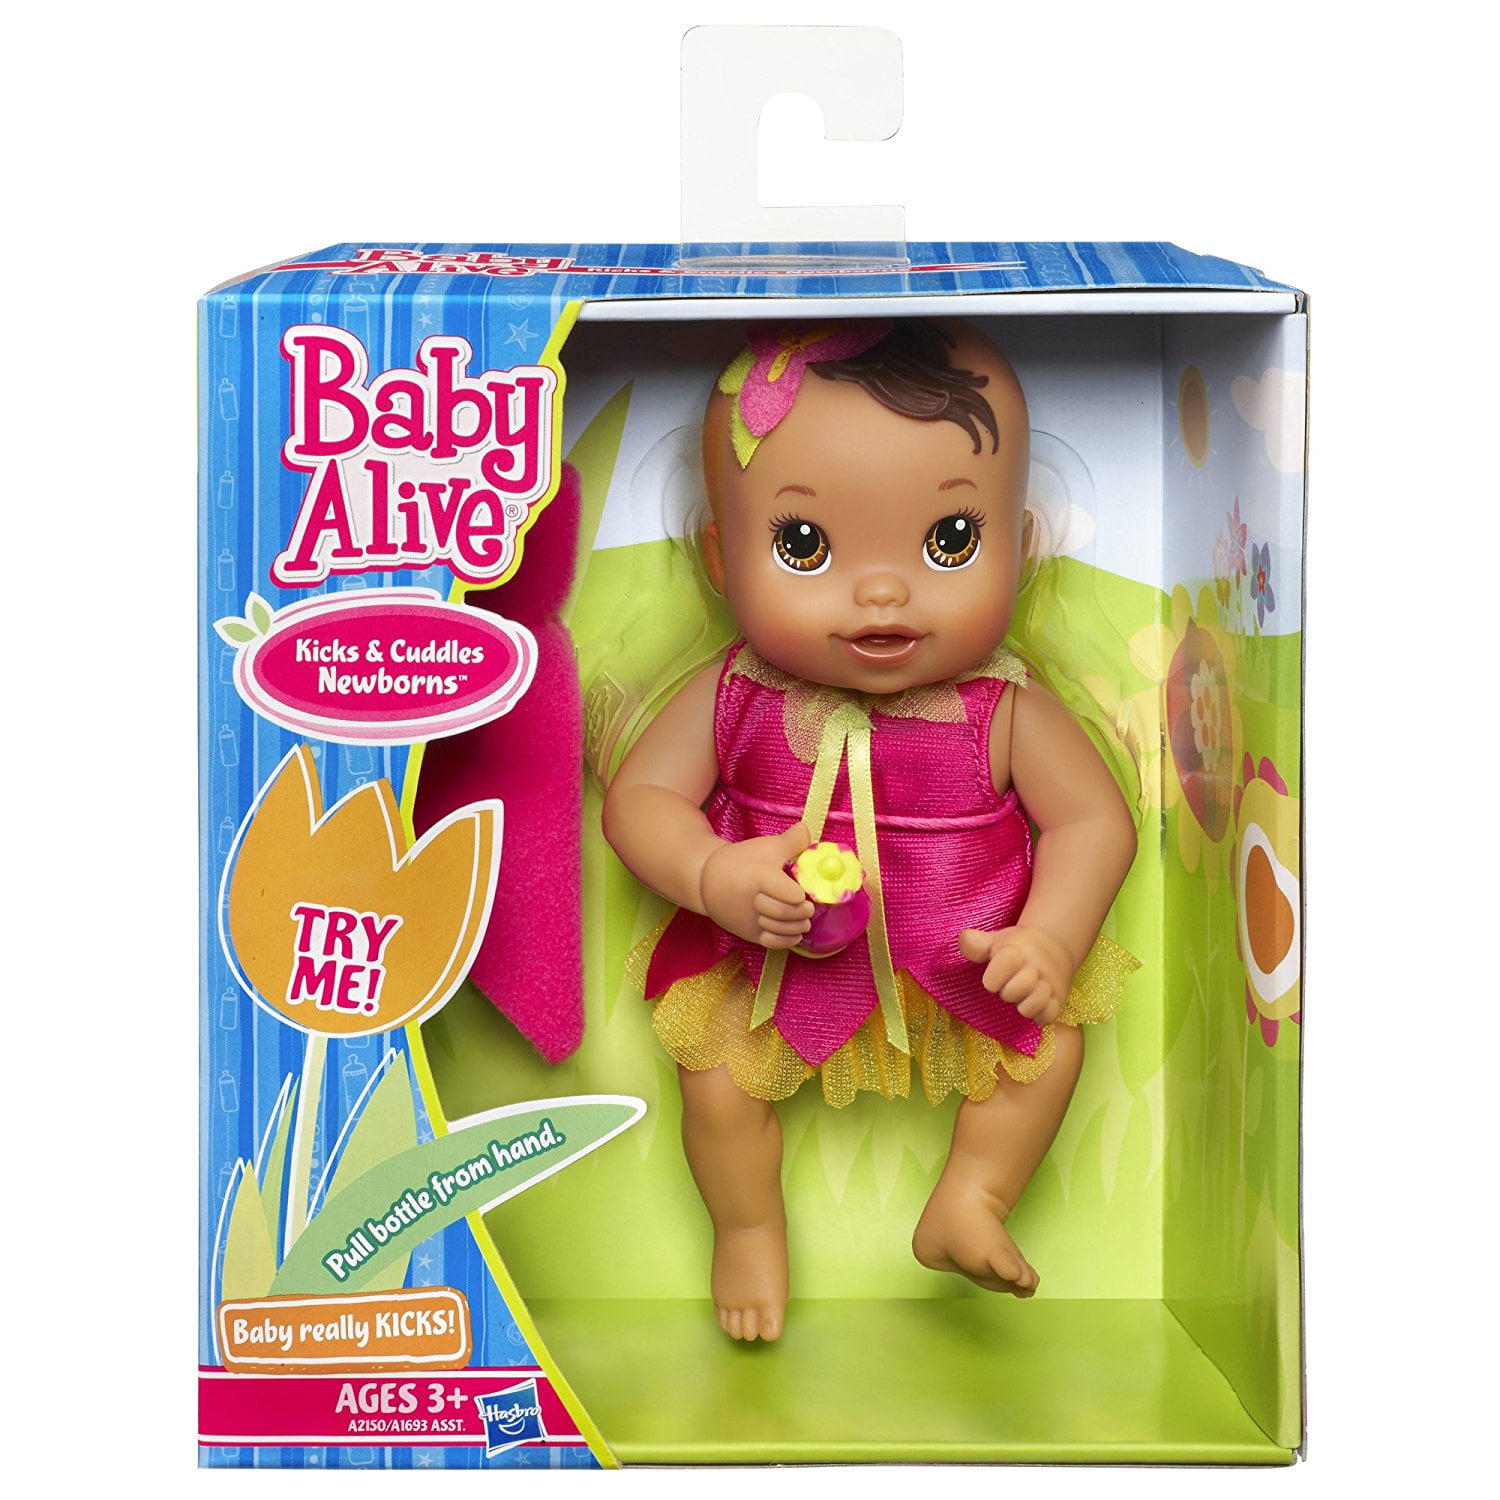 baby alive game